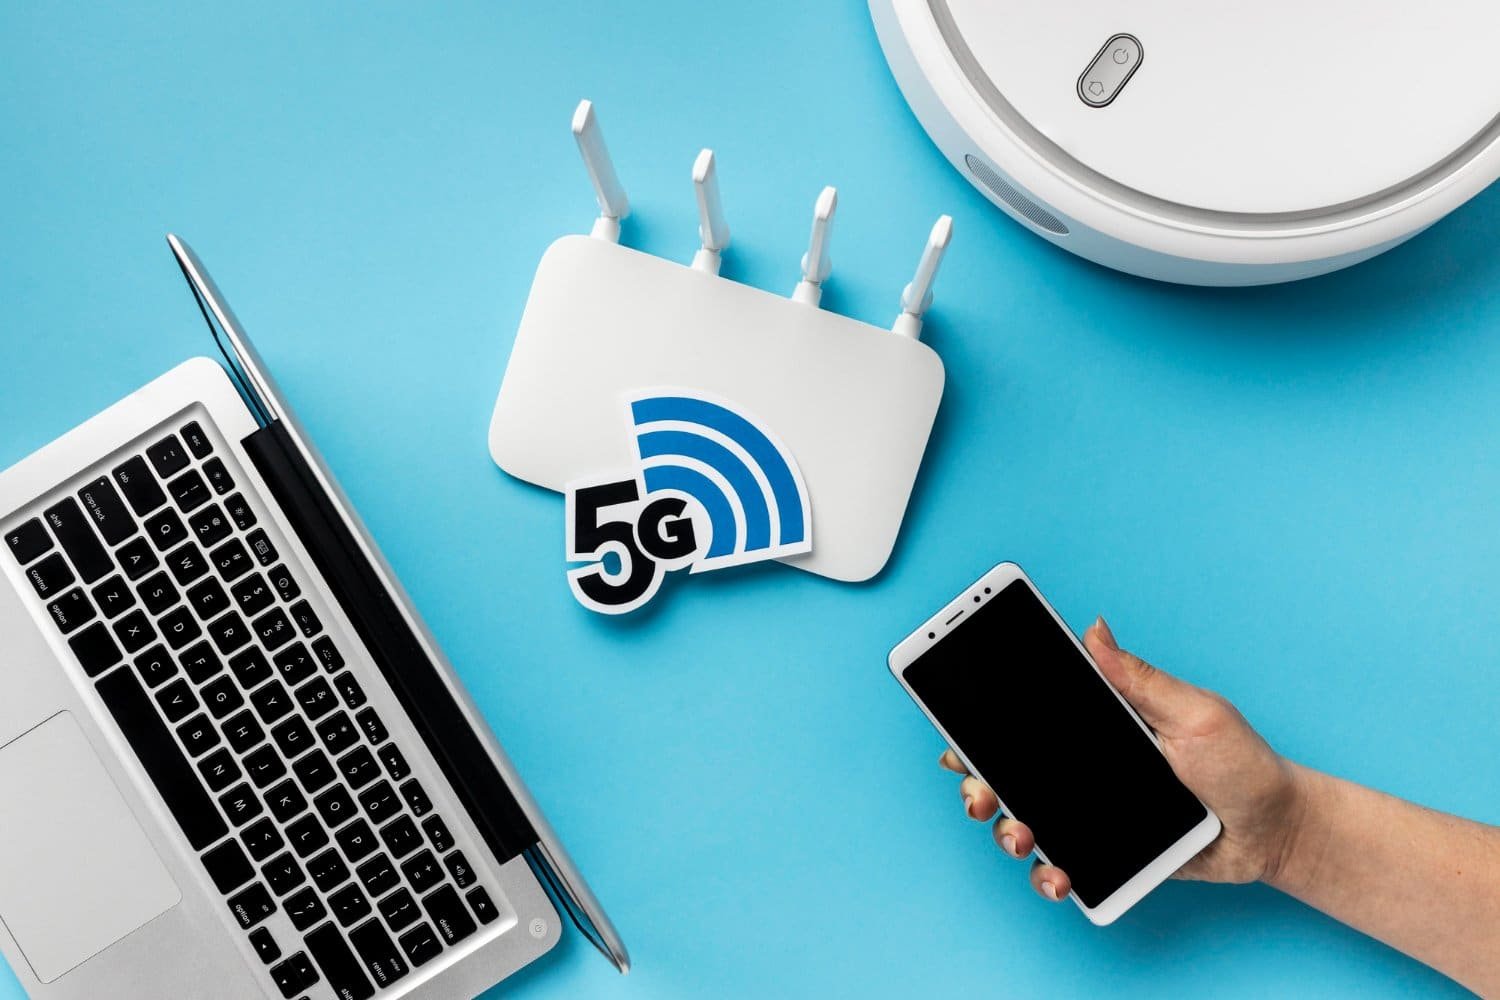 The Latest Developments in Wi-Fi Technology